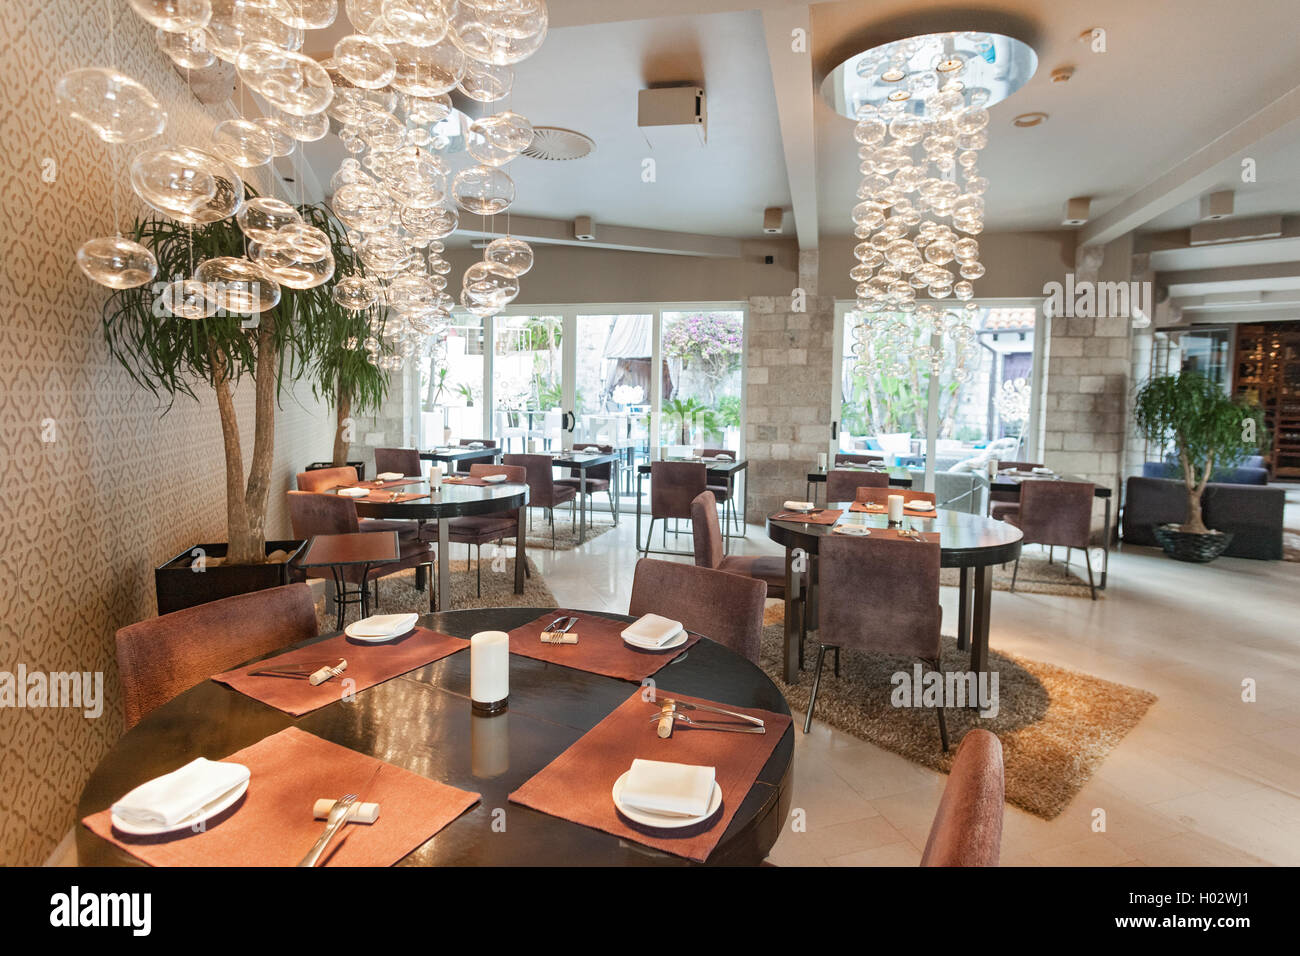 DUBROVNIK, CROATIA - MAY 28, 2014: Interior of the Restaurant 360 degrees on old wall. Stock Photo